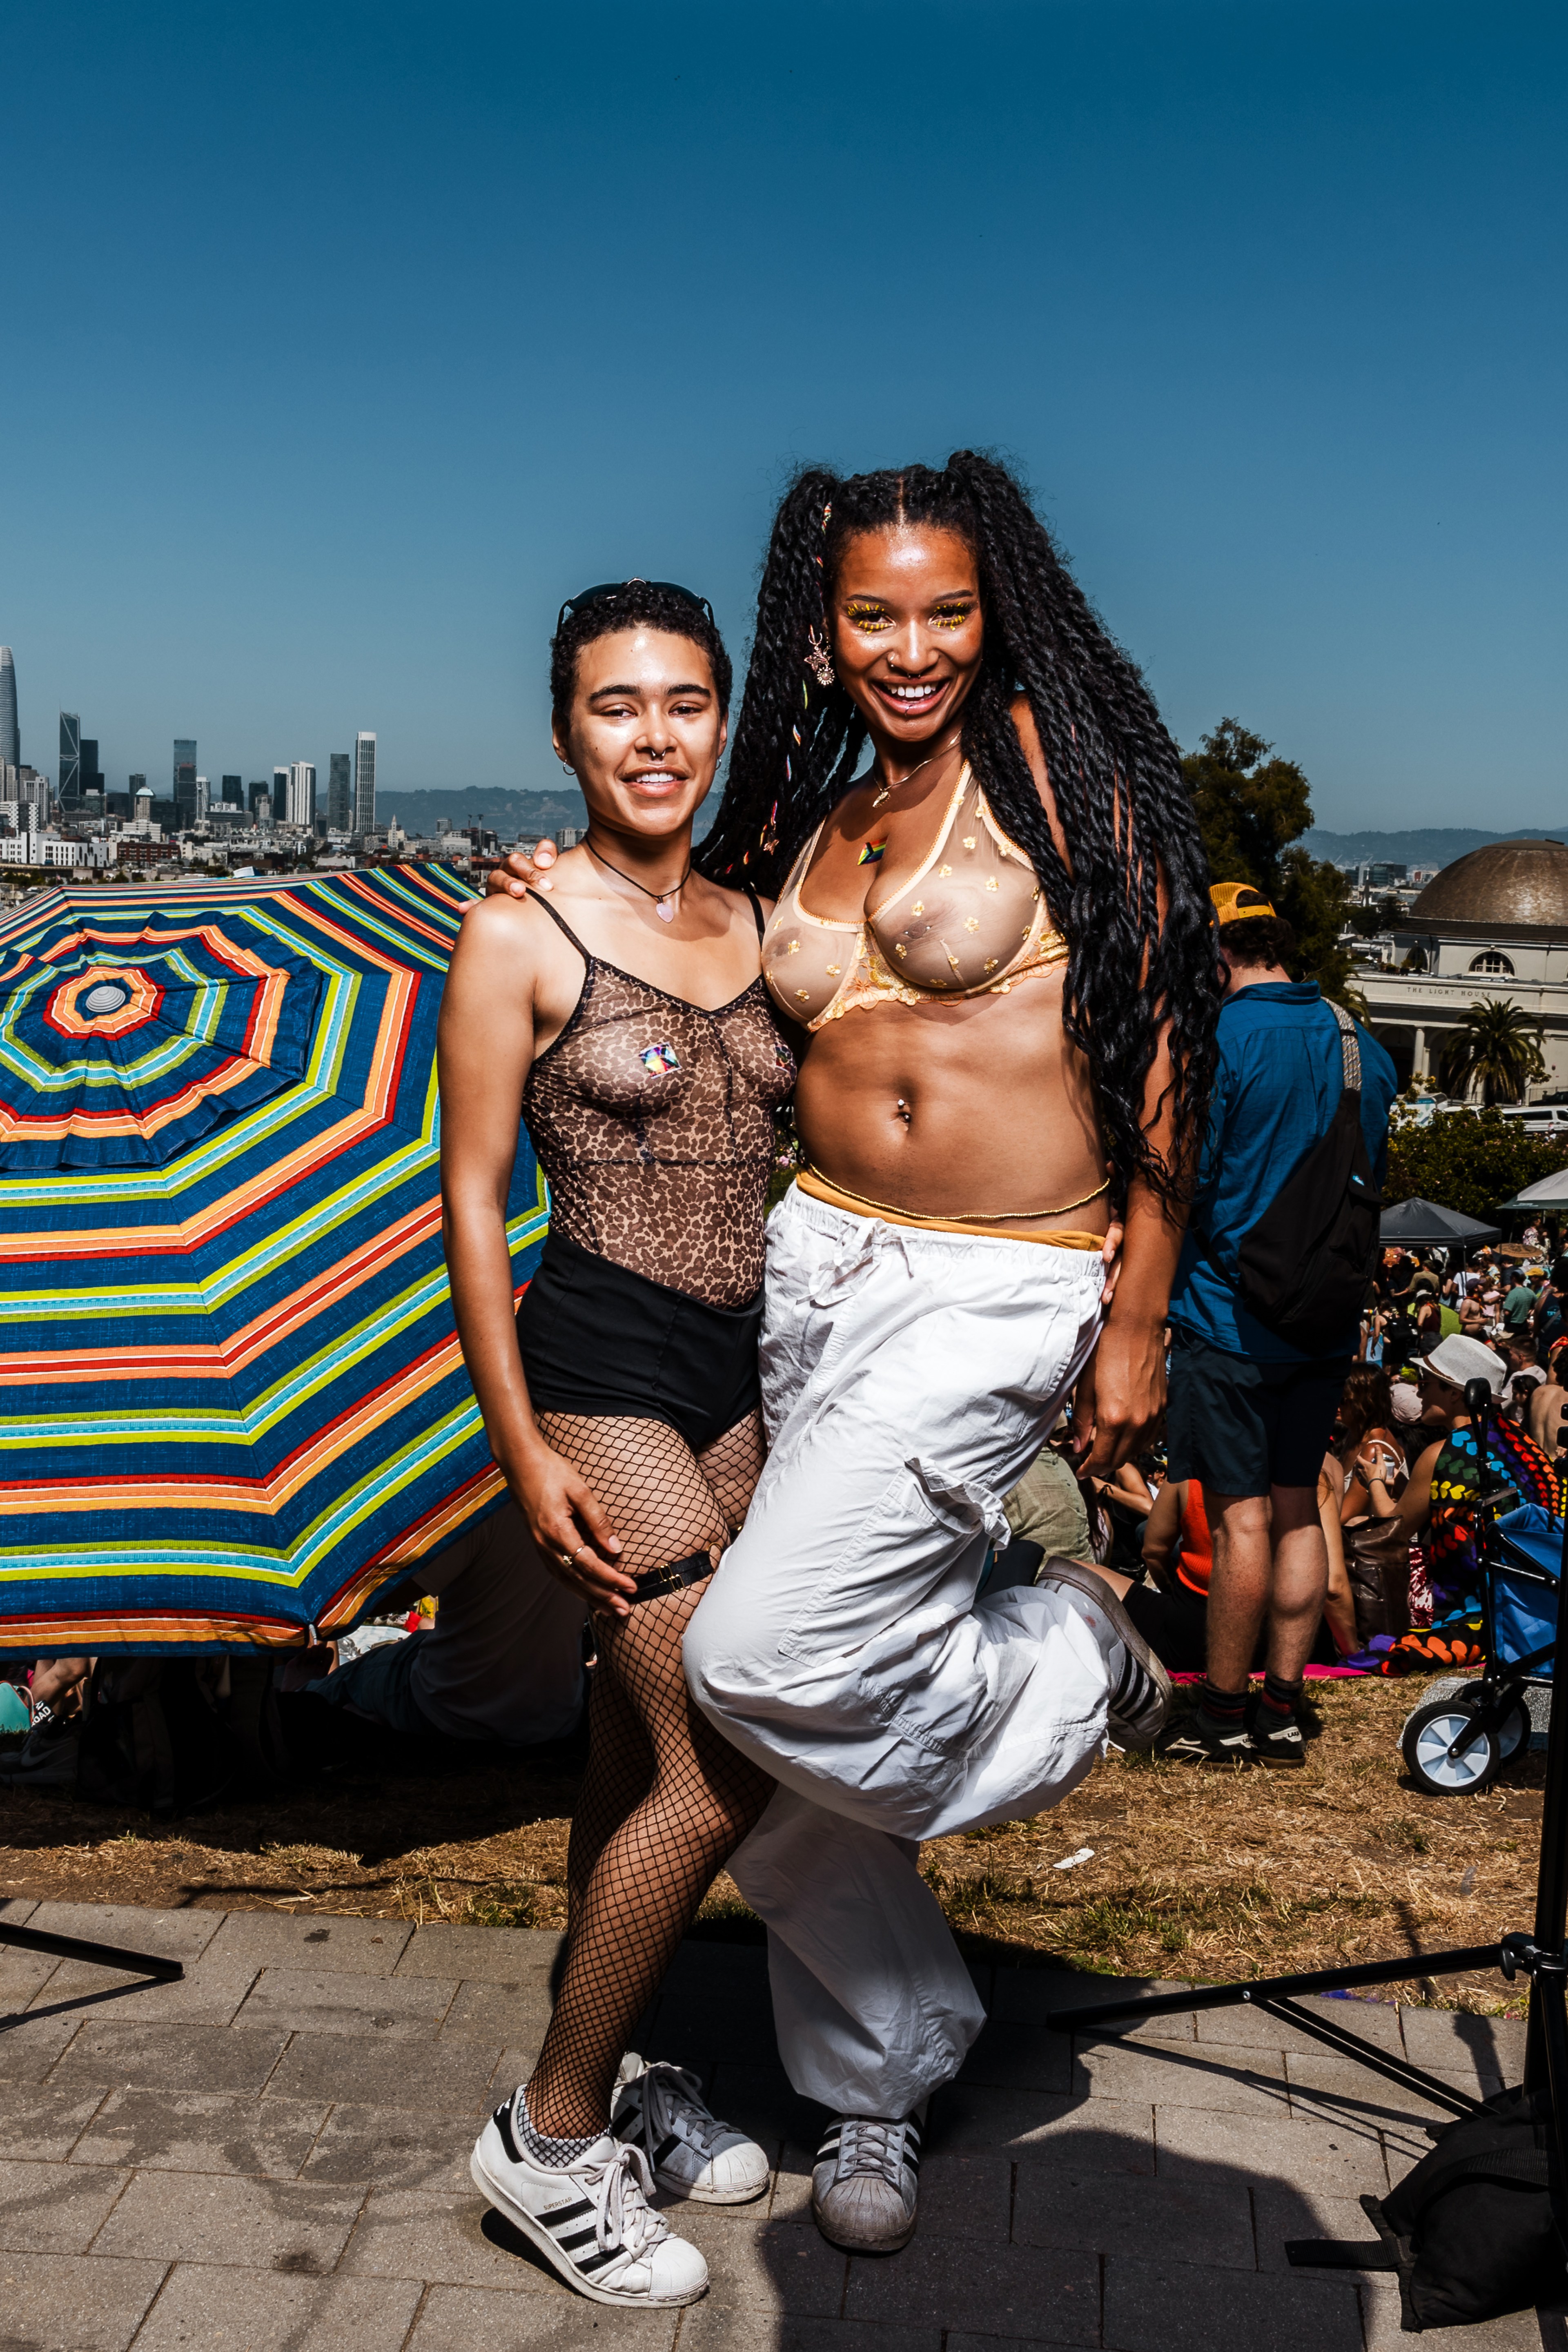 Two people pose cheerfully, one in a sheer leopard print top and fishnet stockings, the other in a sheer gold top and white pants. A colorful umbrella and a cityscape are visible behind them.